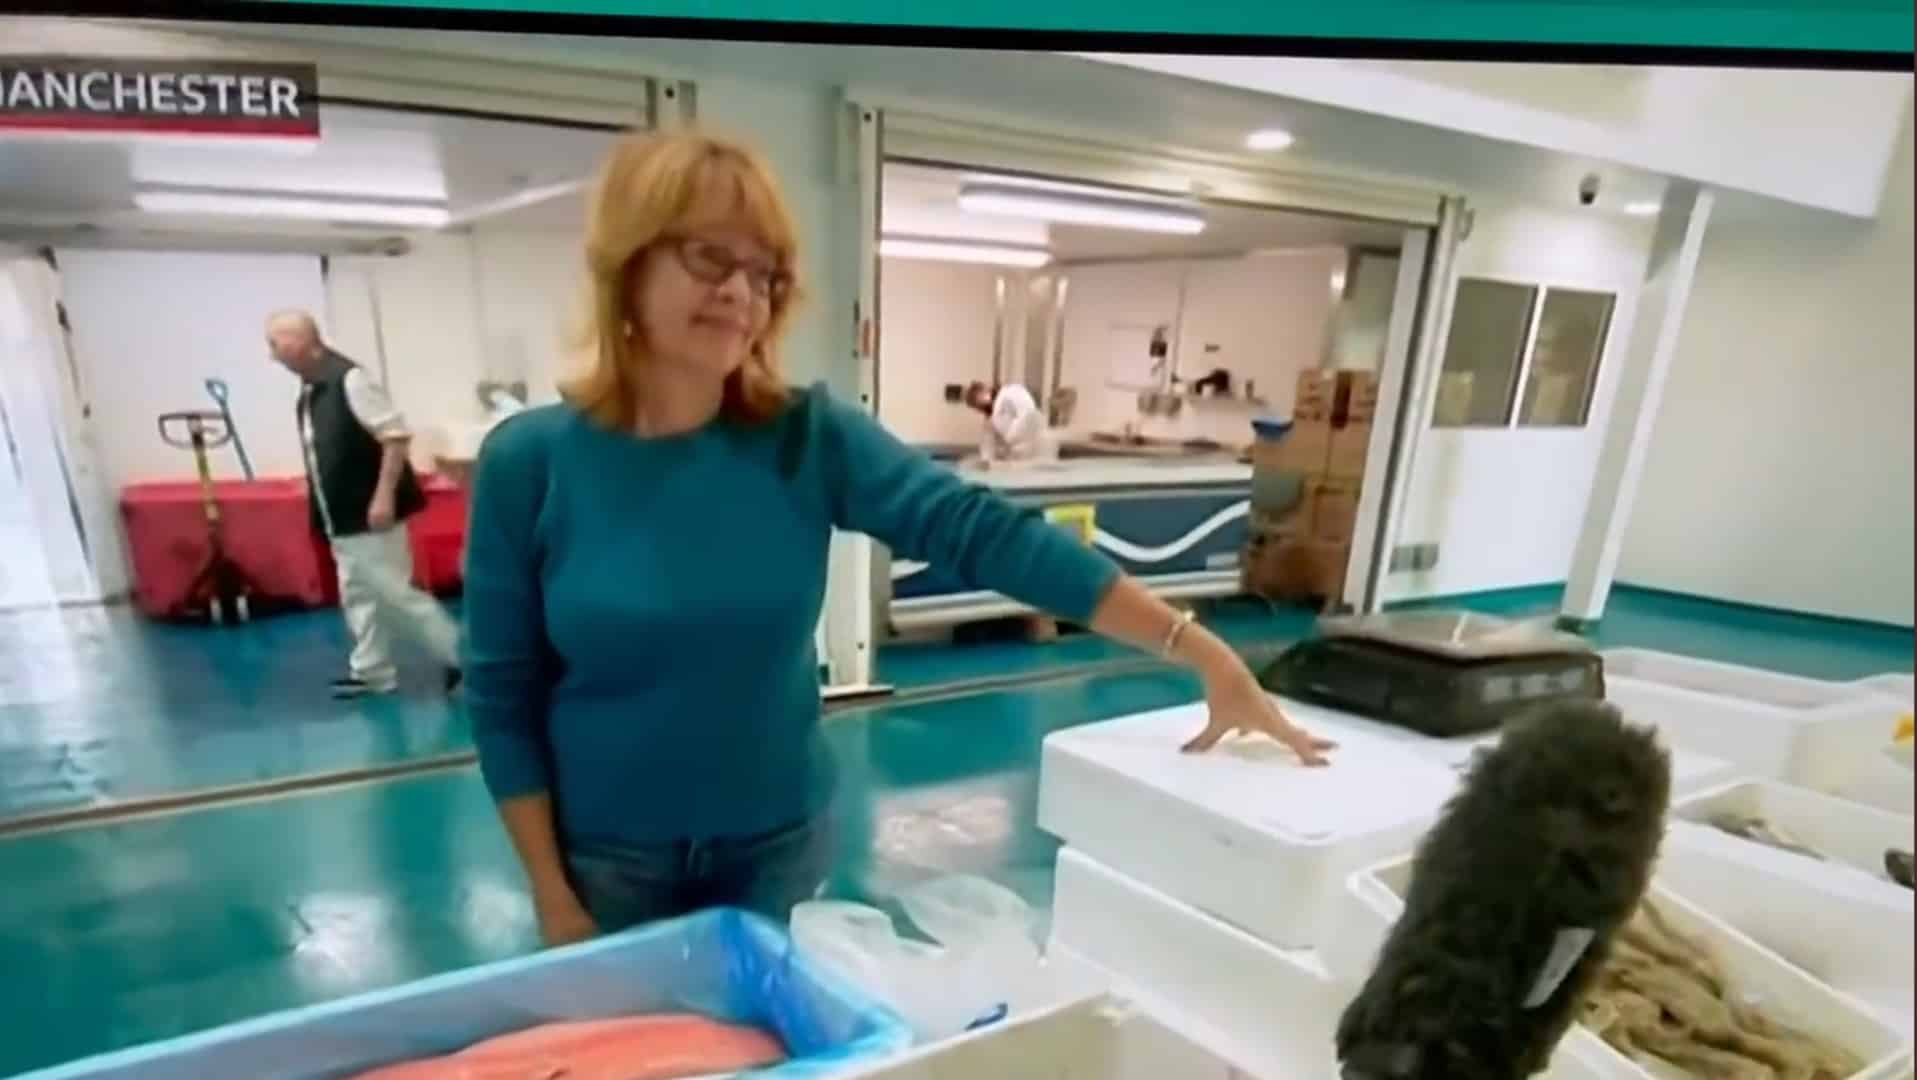 ‘People should know the truth about Brexit’: Businesswoman speaks out after controversial BBC edit